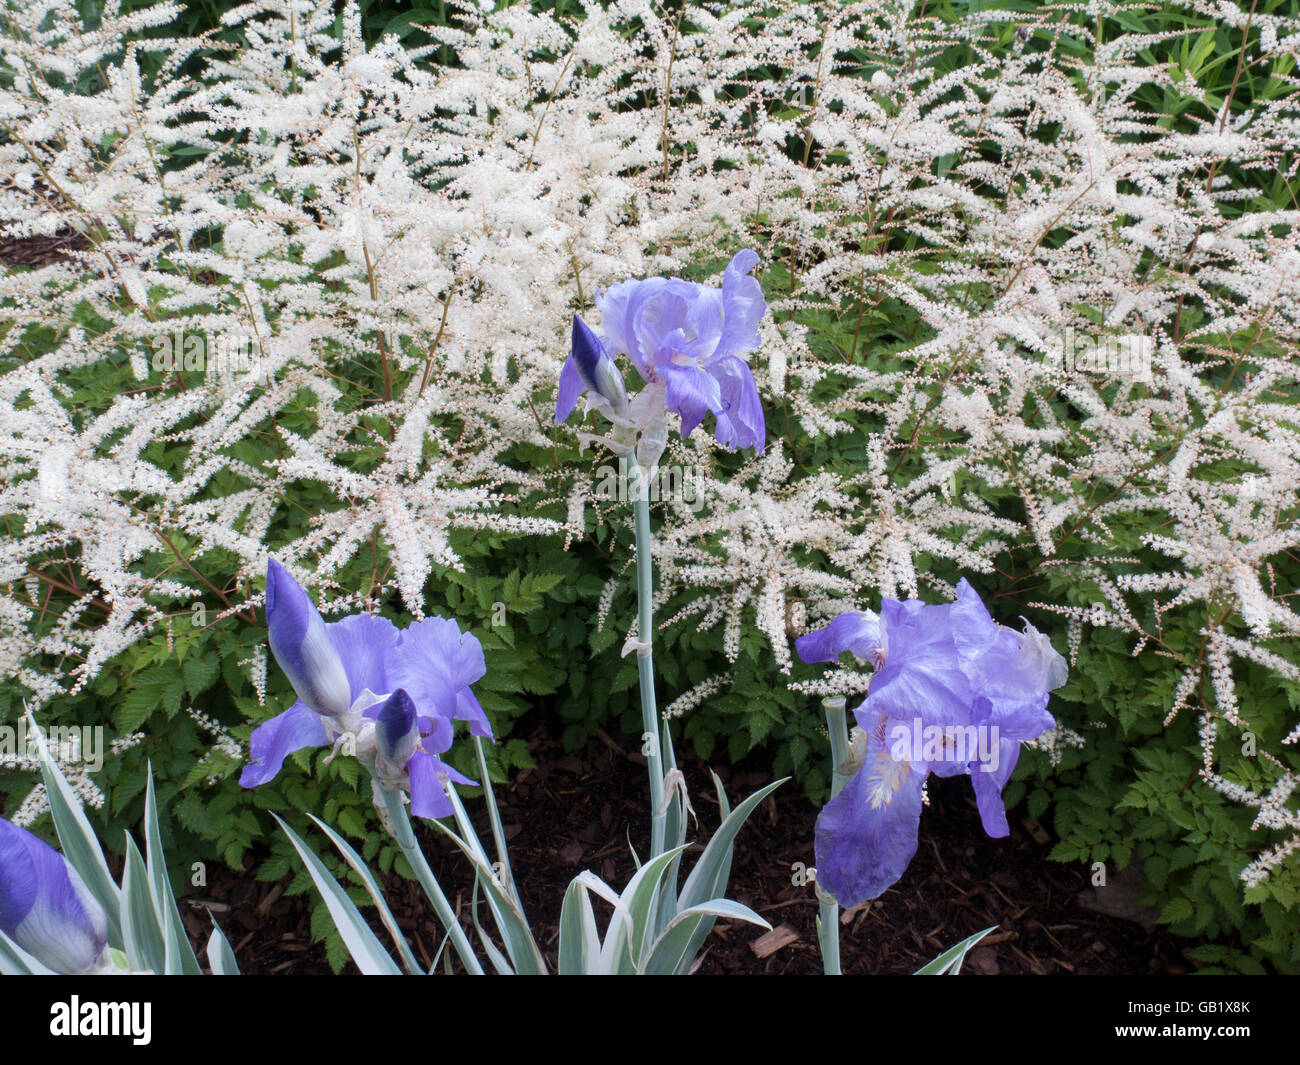 White astilbe and blue bearded iris make a lovely combination in this spring garden. Stock Photo